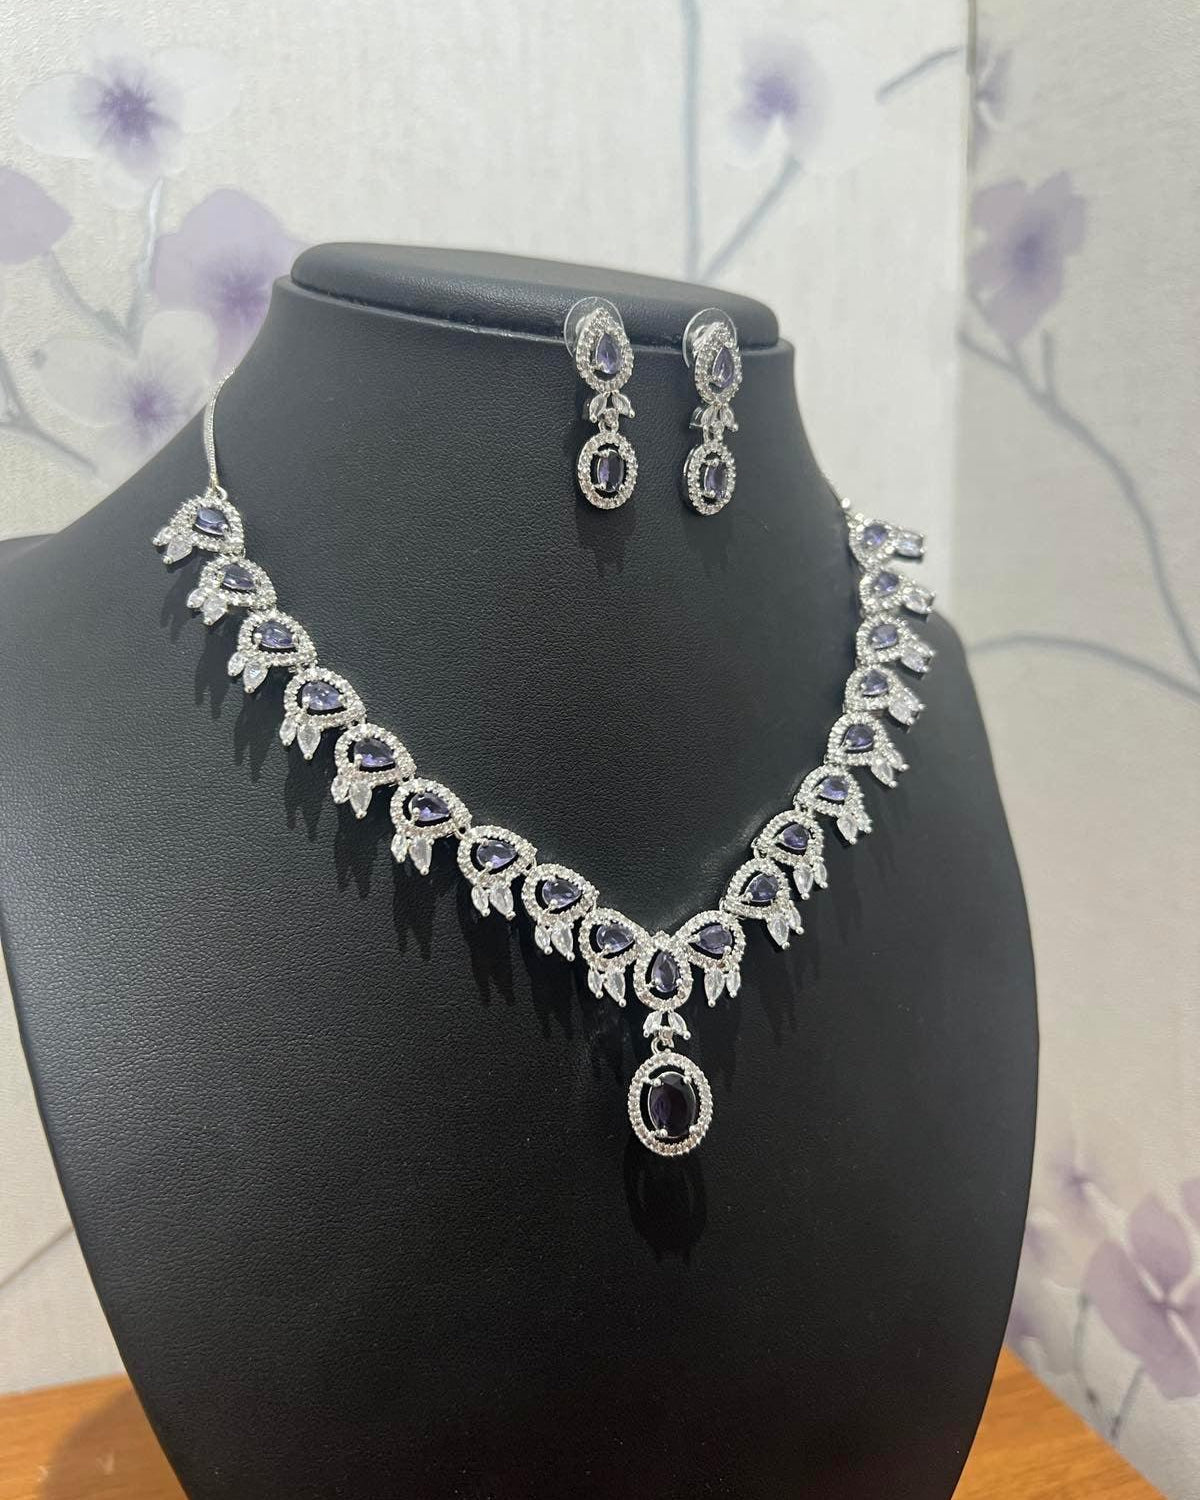 American Diamond Necklace with Lavender Stone - Boutique Nepal